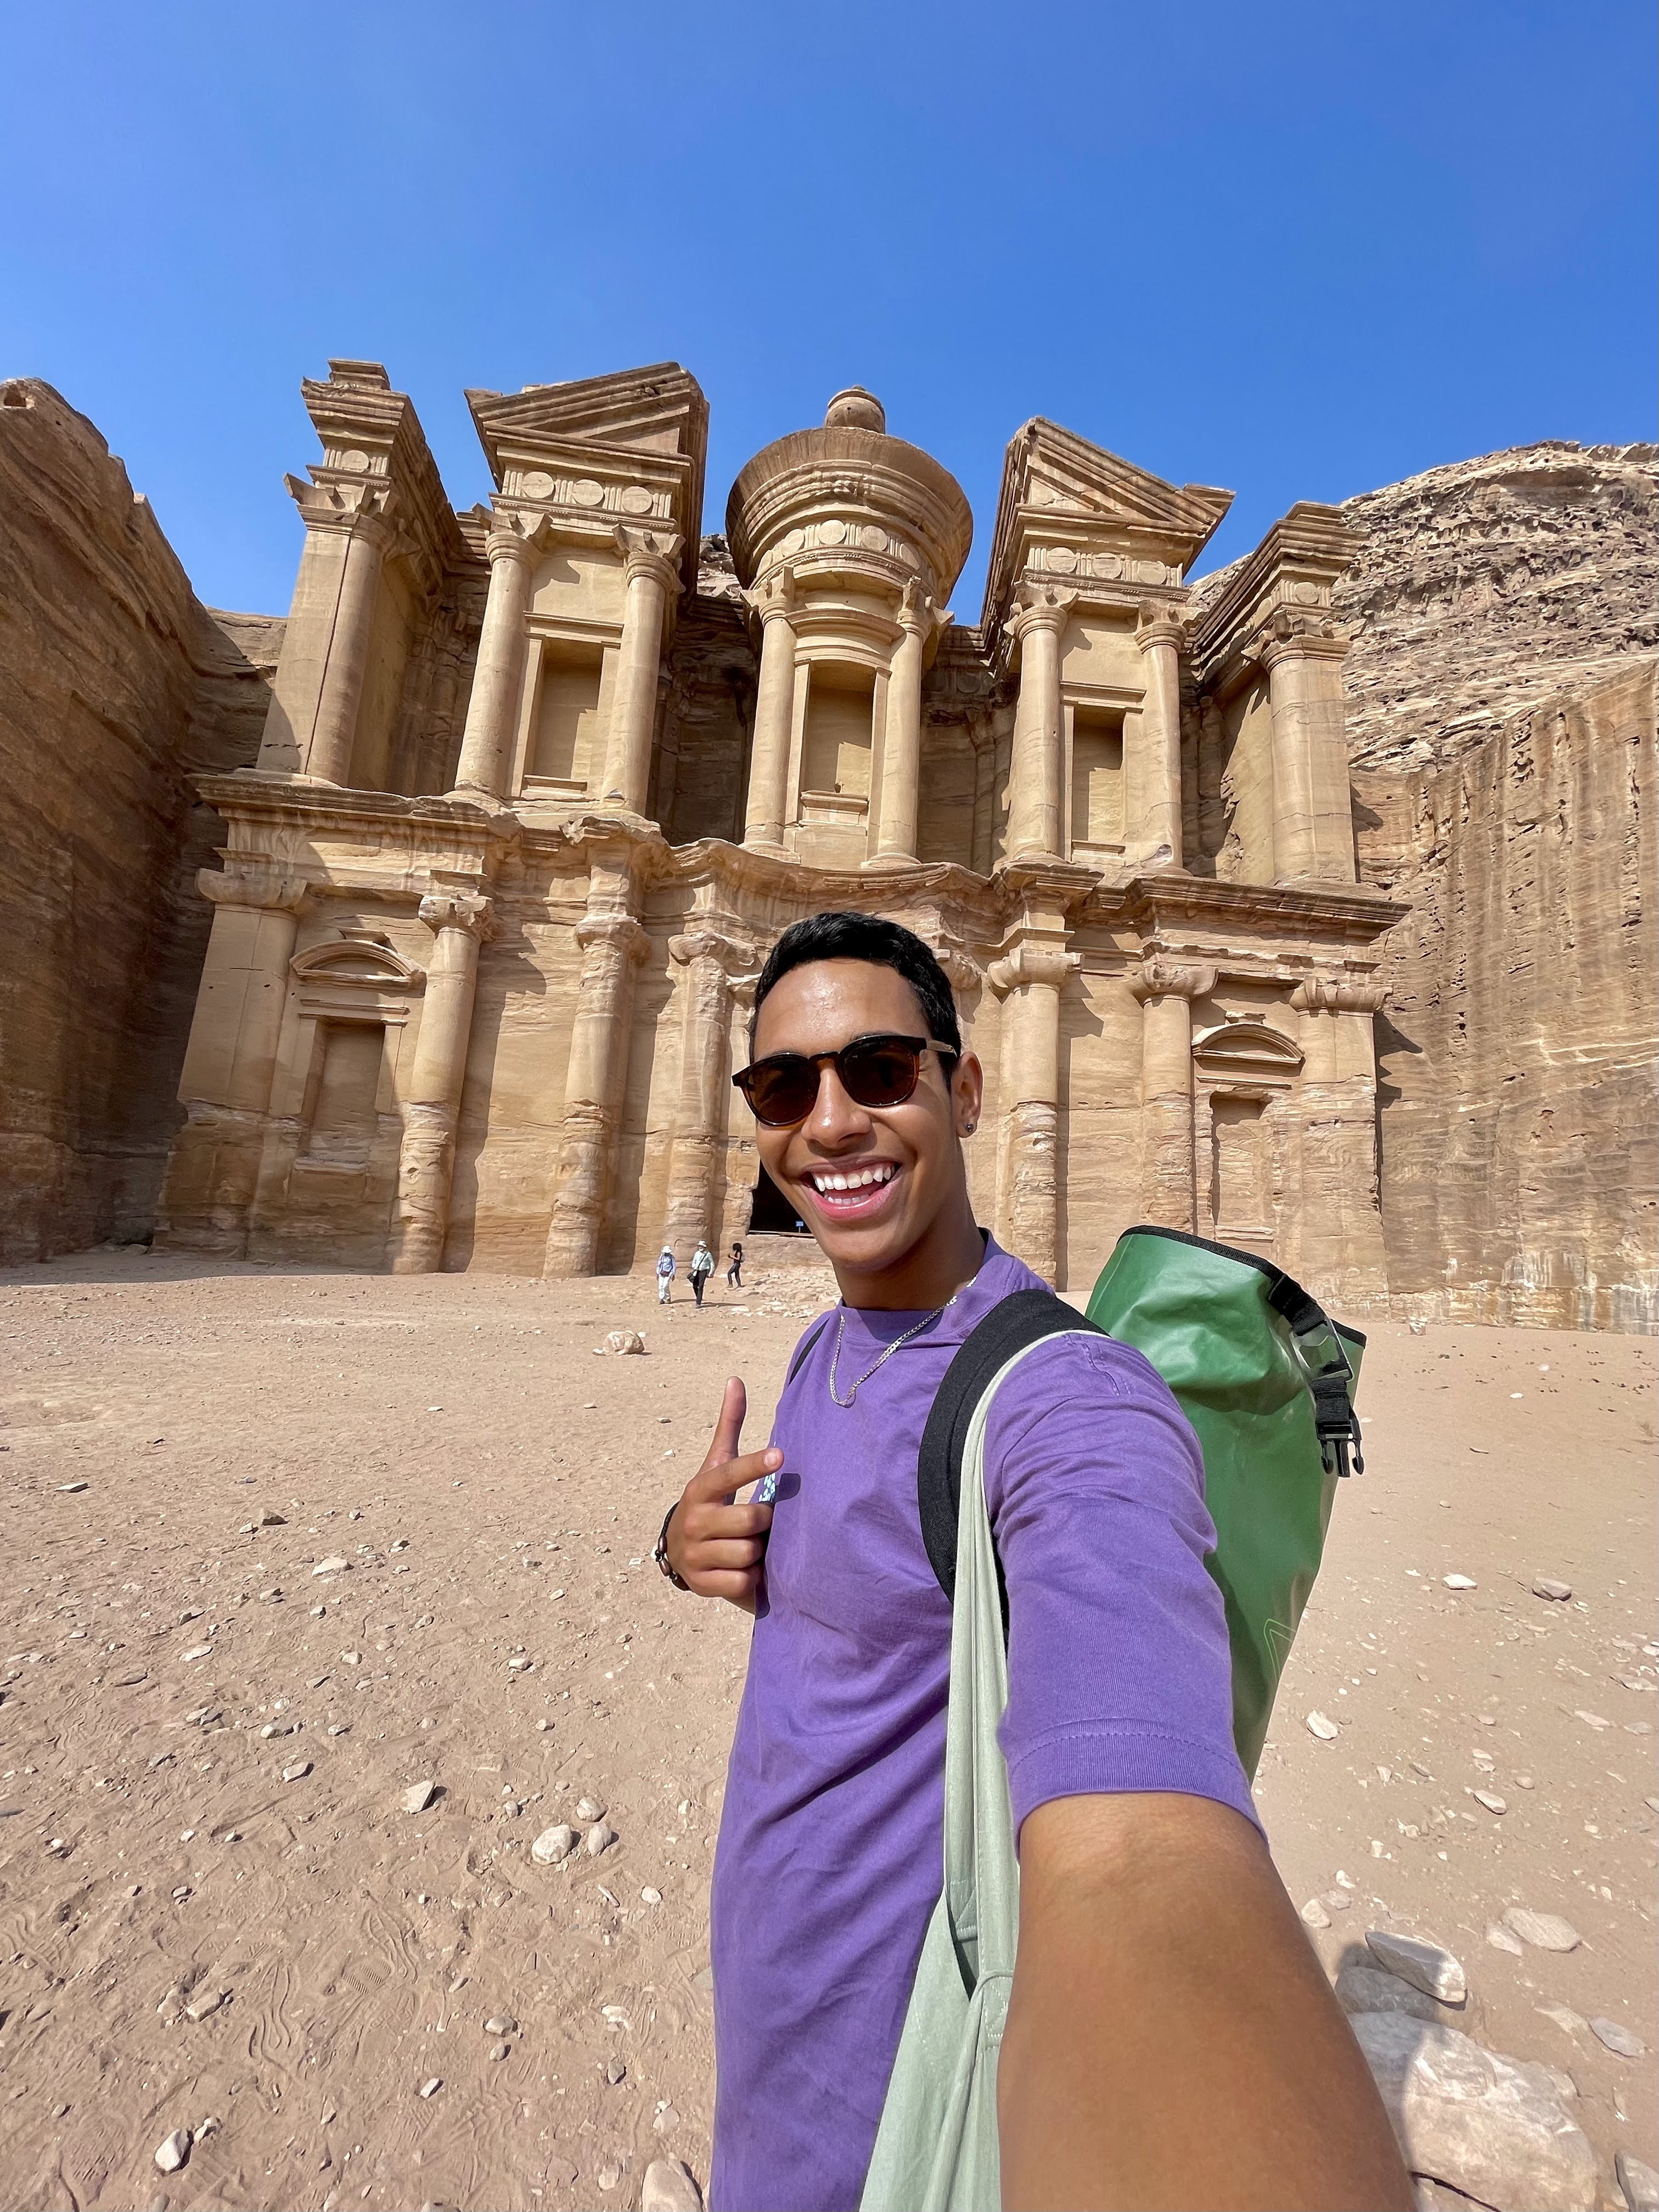 Selfie in front of the canyon of Petra